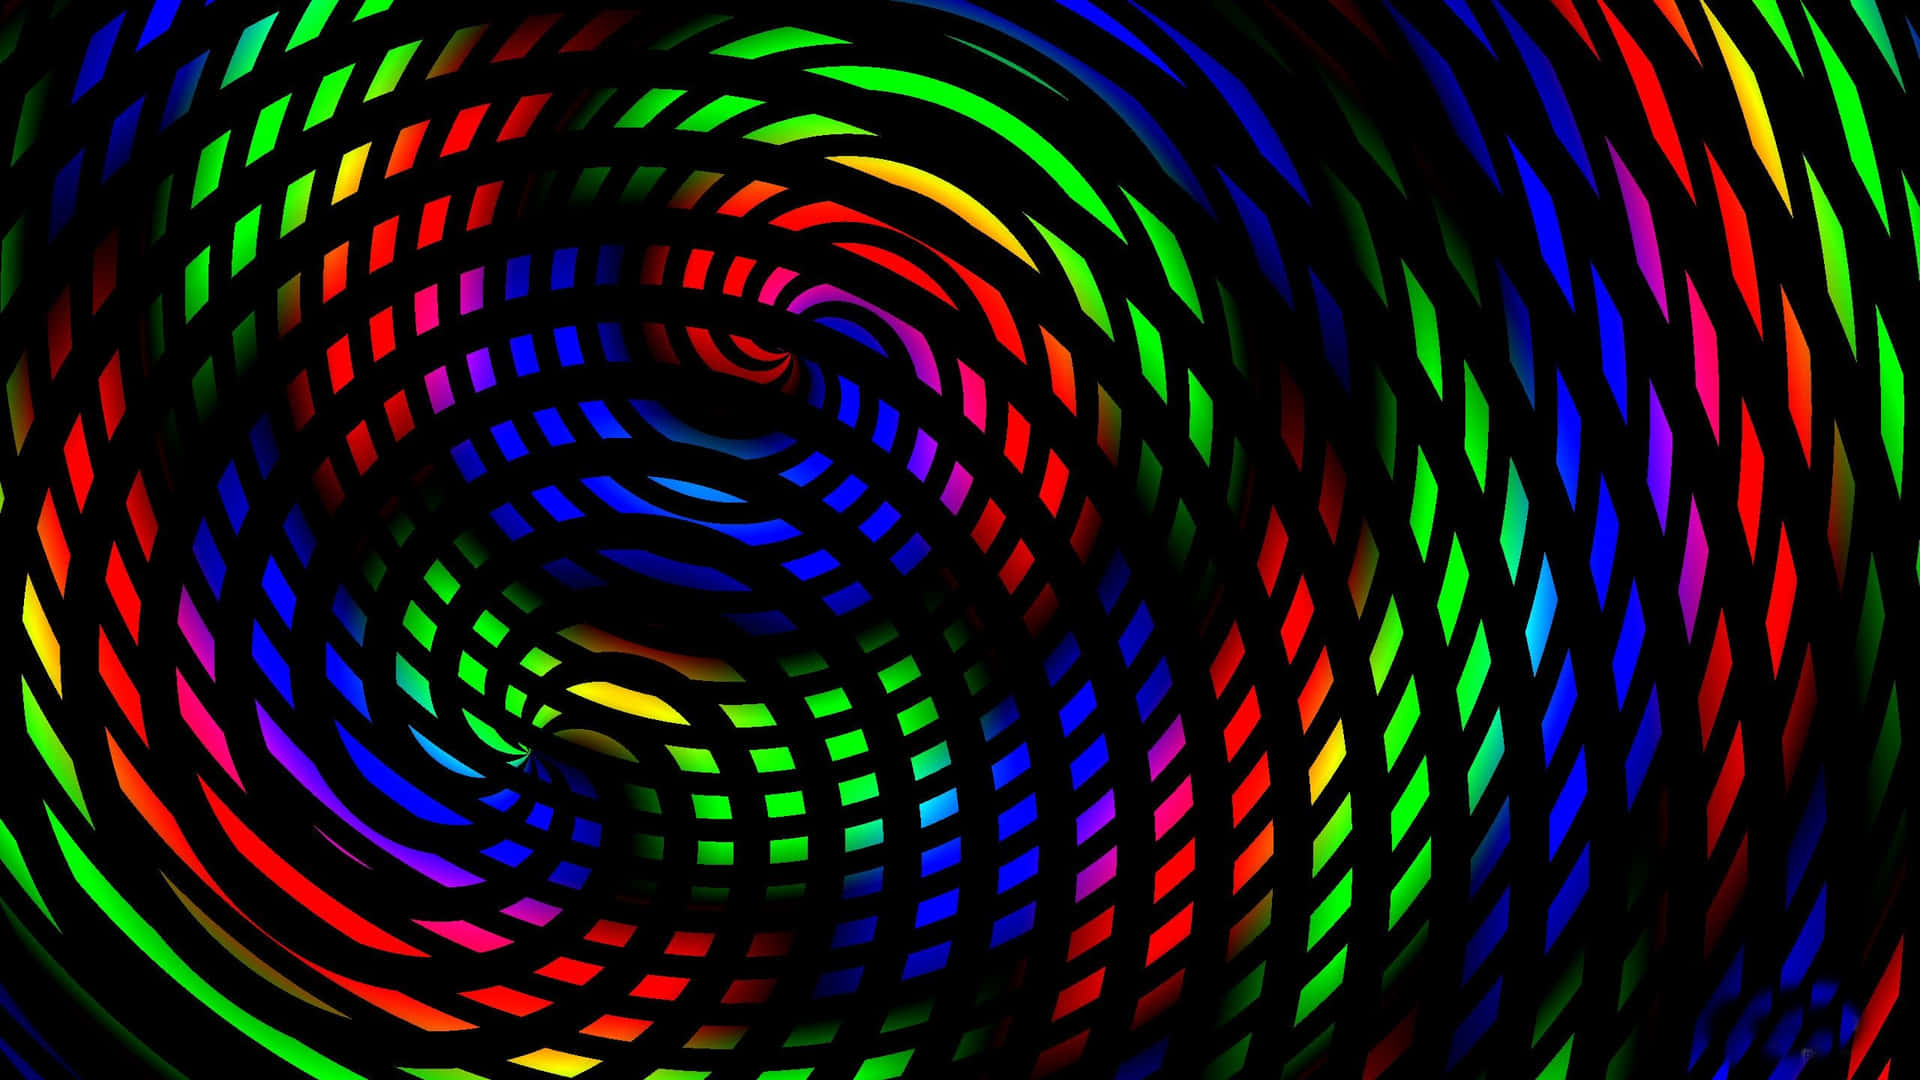 A Colorful Spiral Pattern With A Black Background Wallpaper